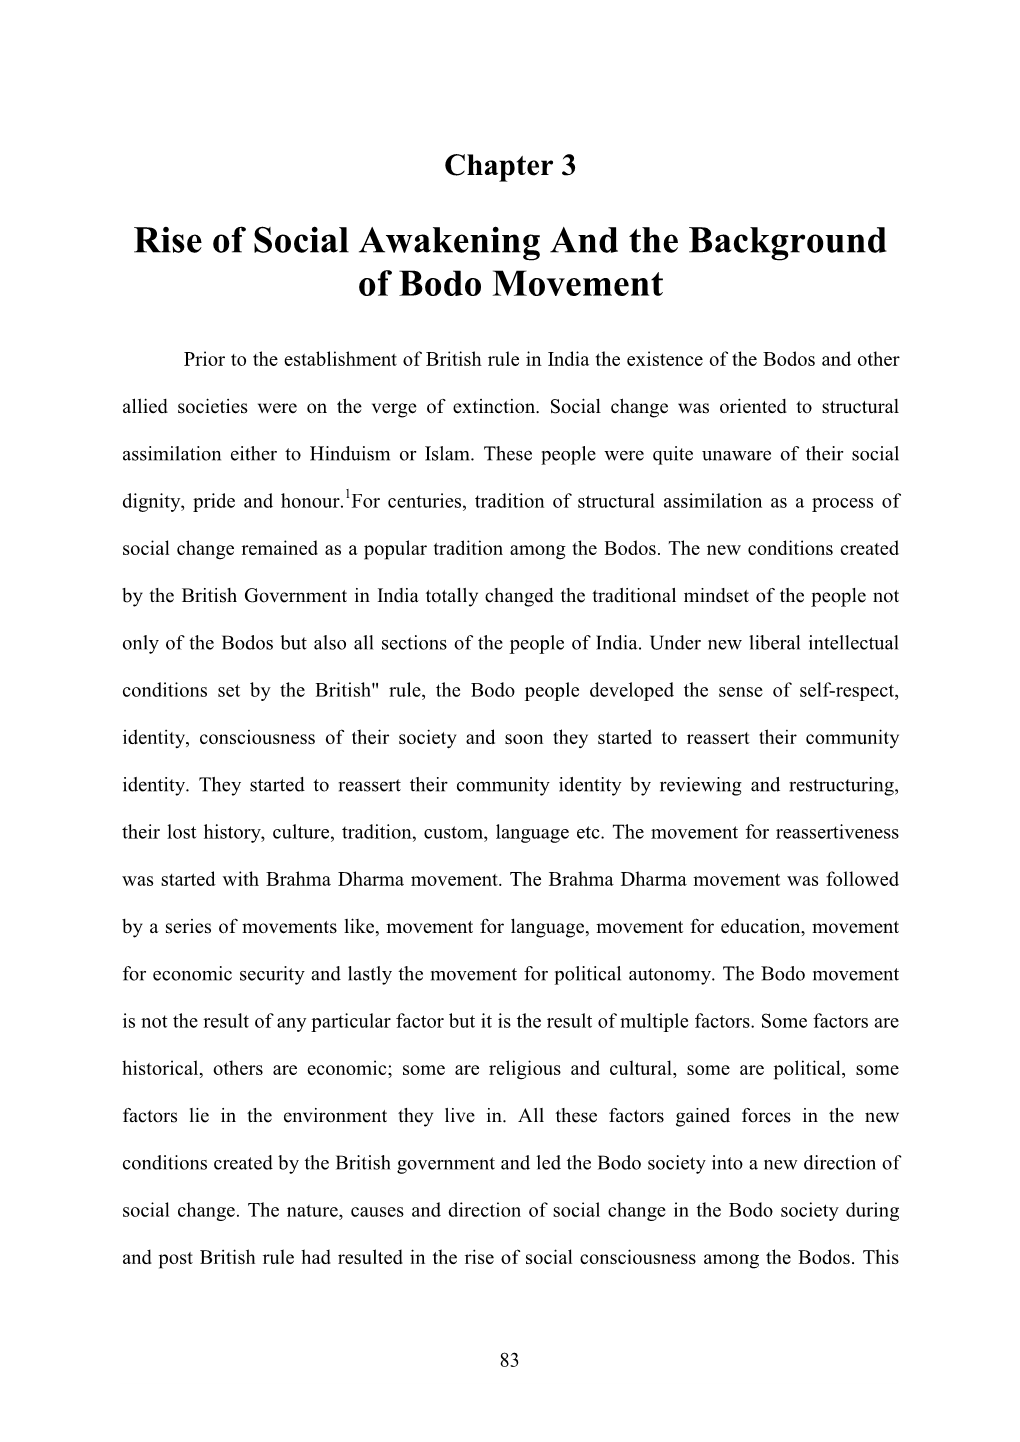 Rise of Social Awakening and the Background of Bodo Movement